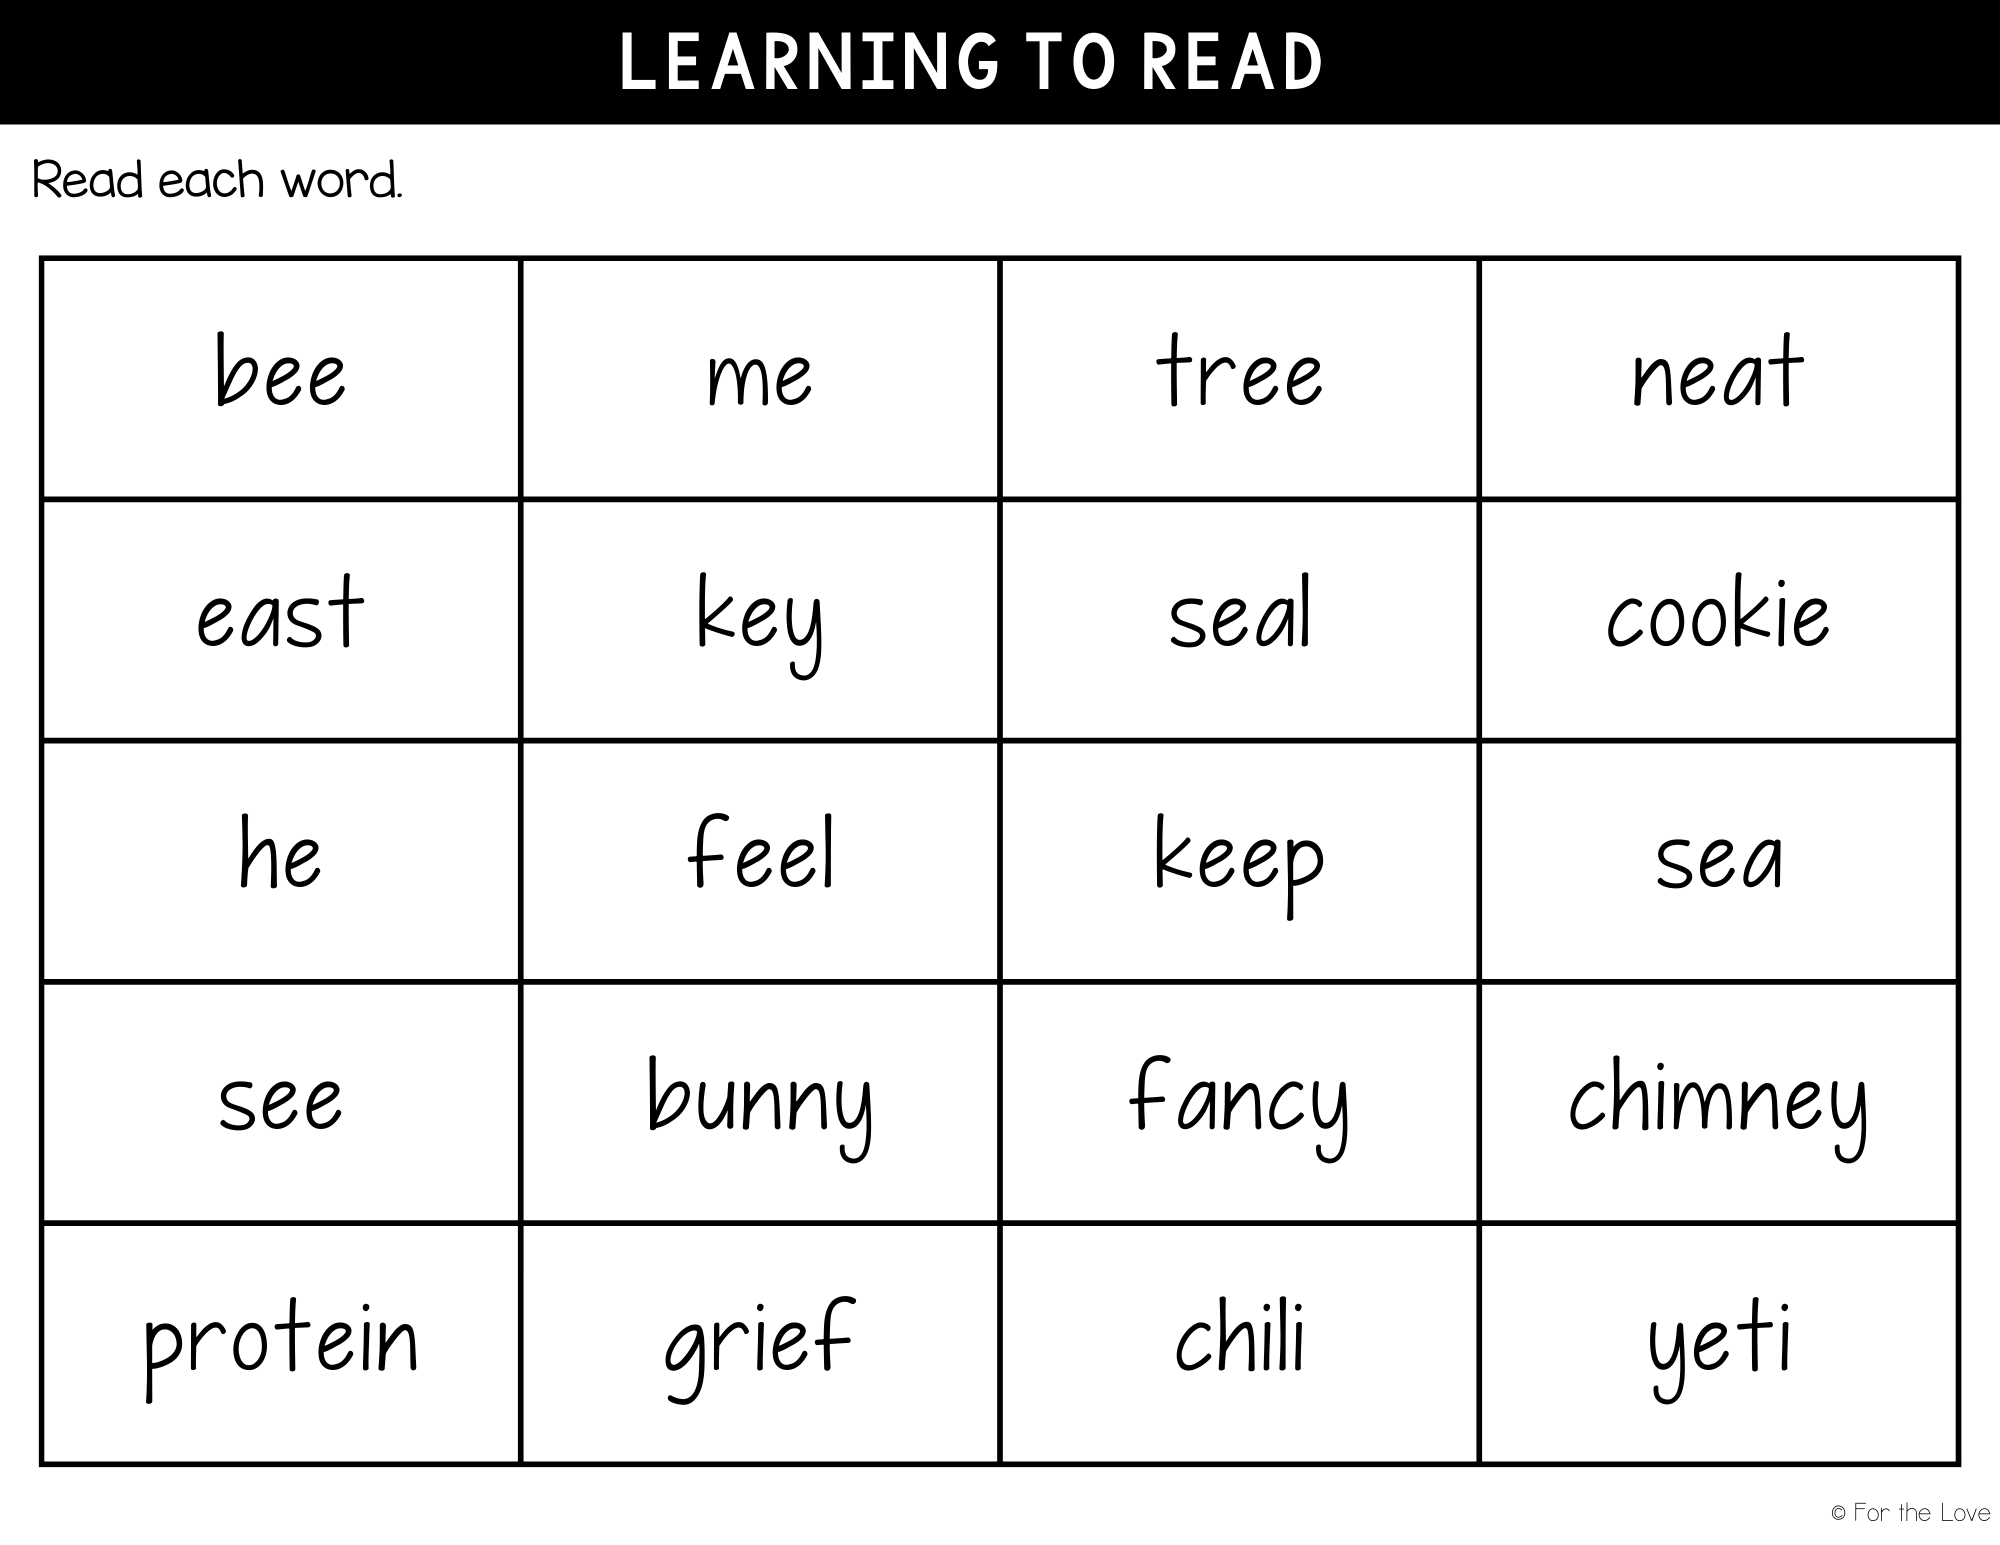 practice reading words with the long /e/ sound